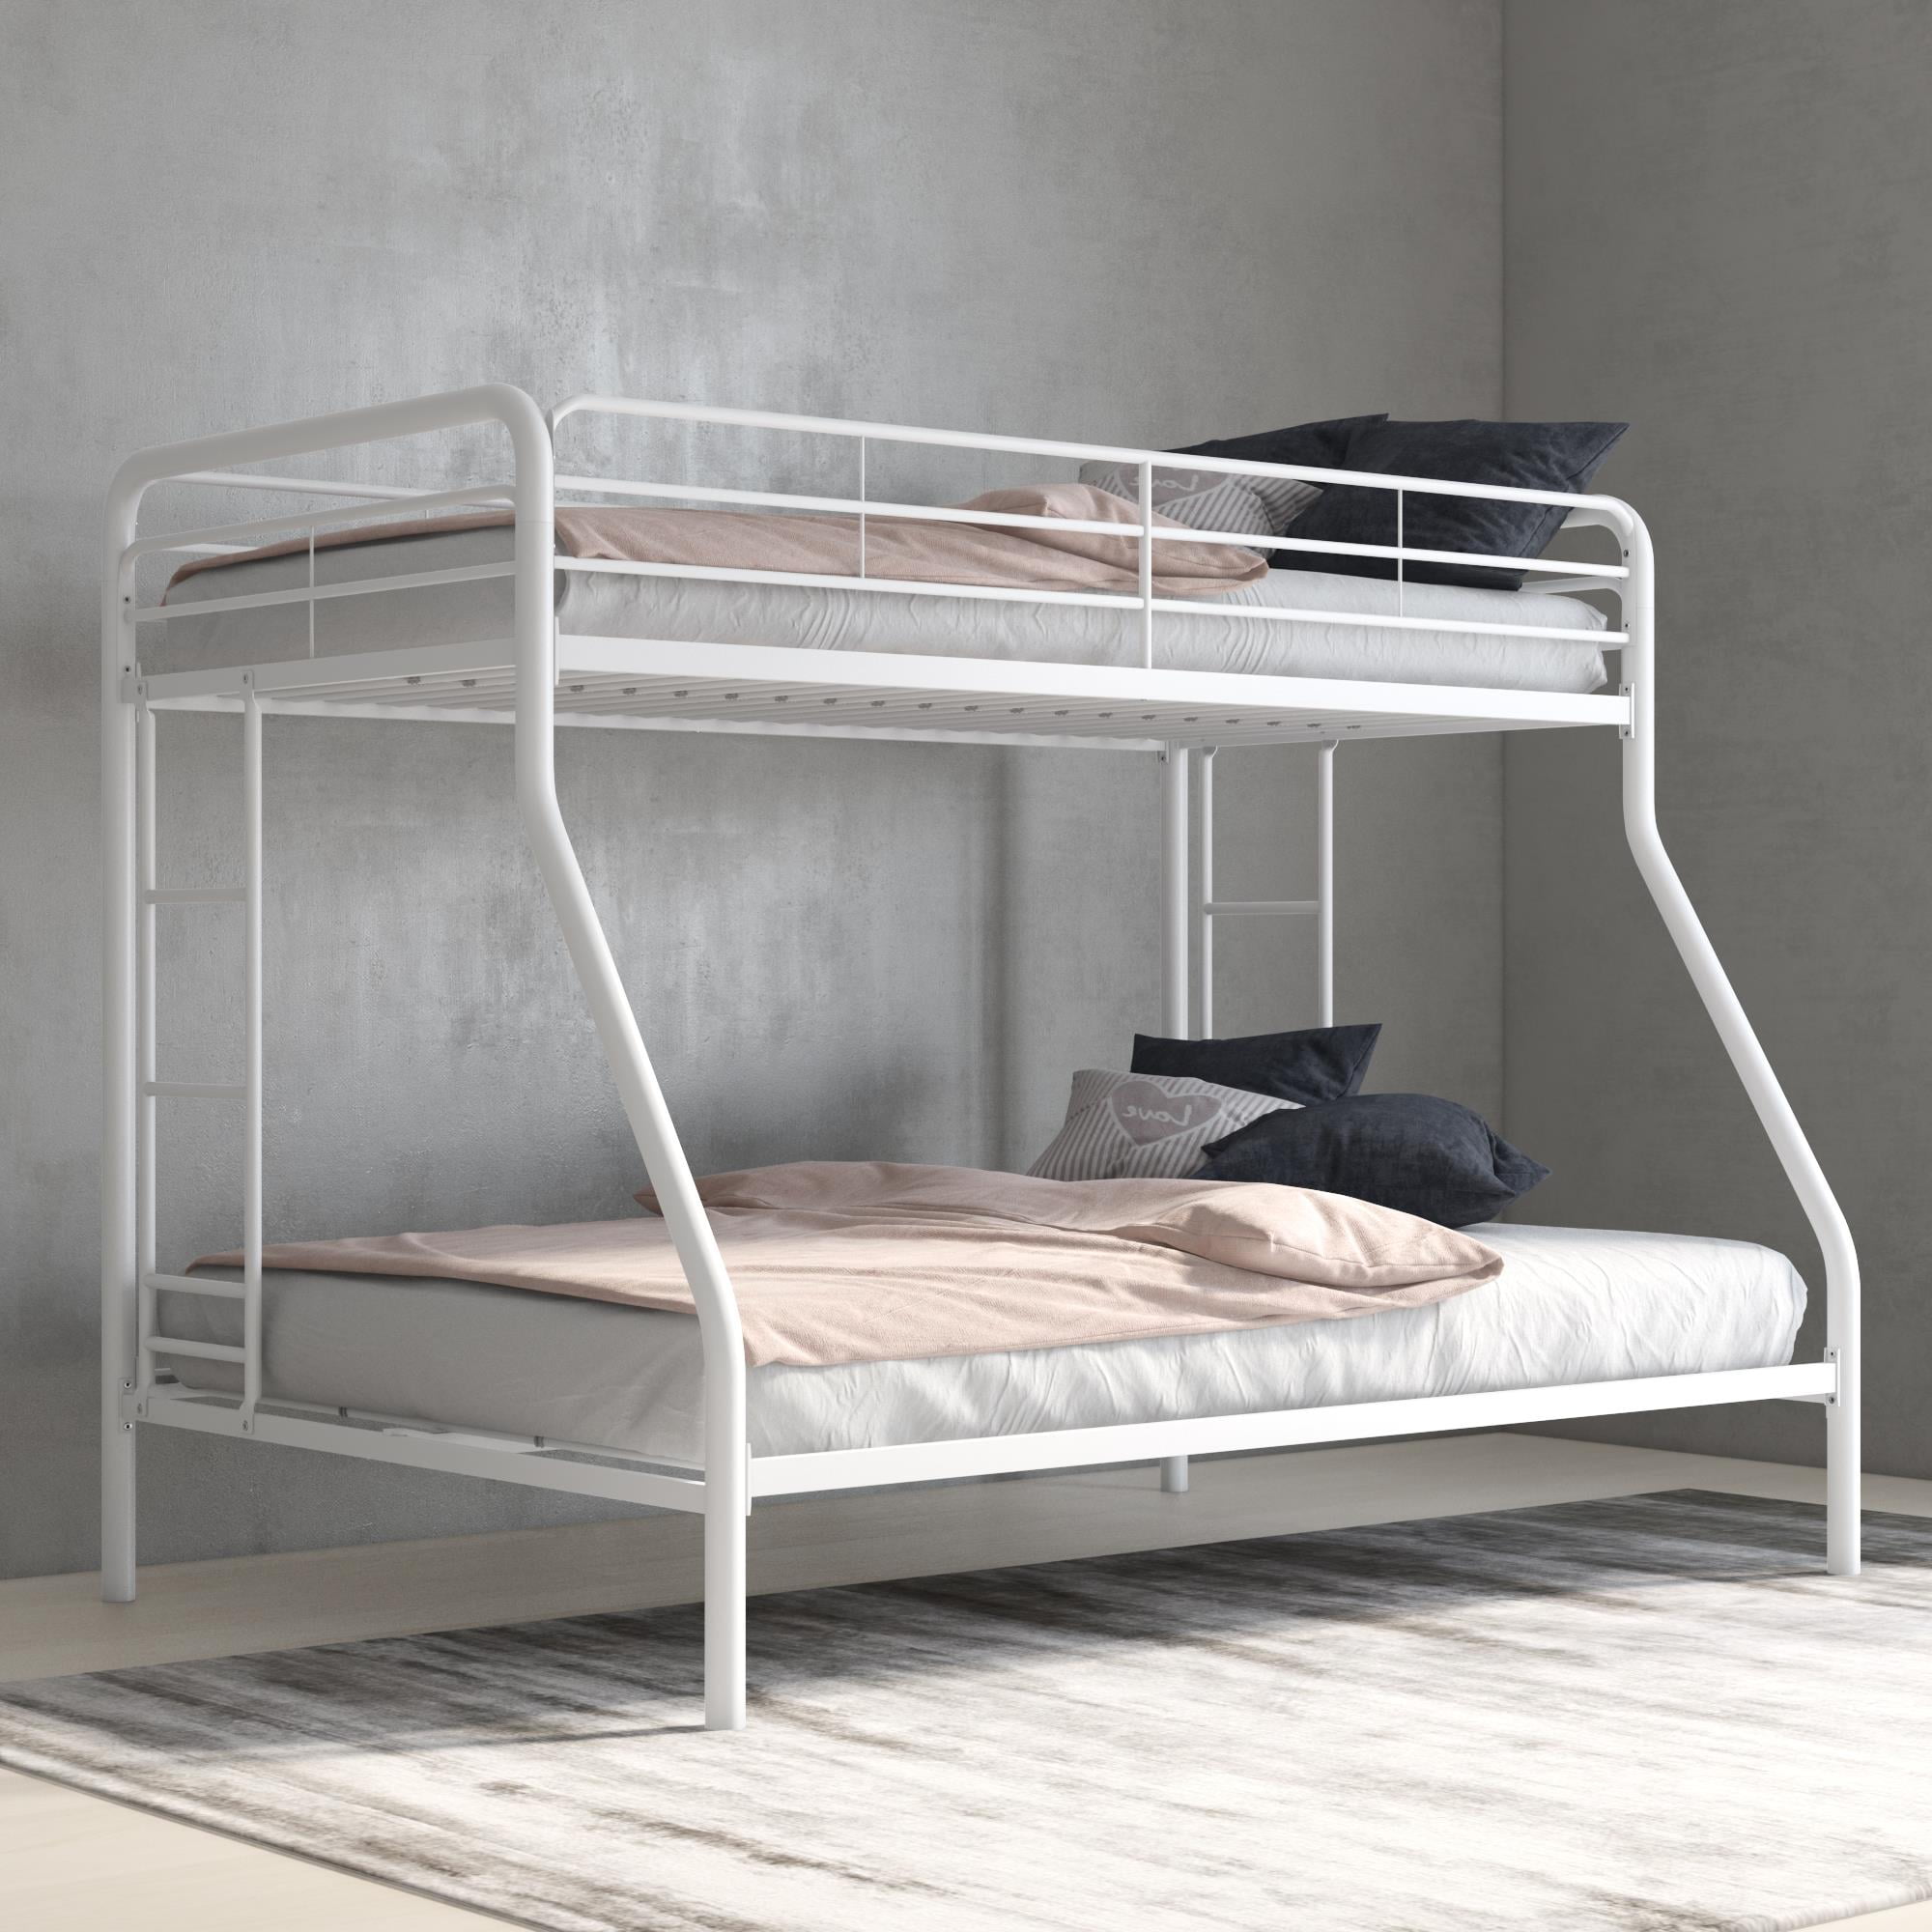 Dhp Twin Over Full Metal Bunk Bed Frame, Dhp Bunk Bed Instructions